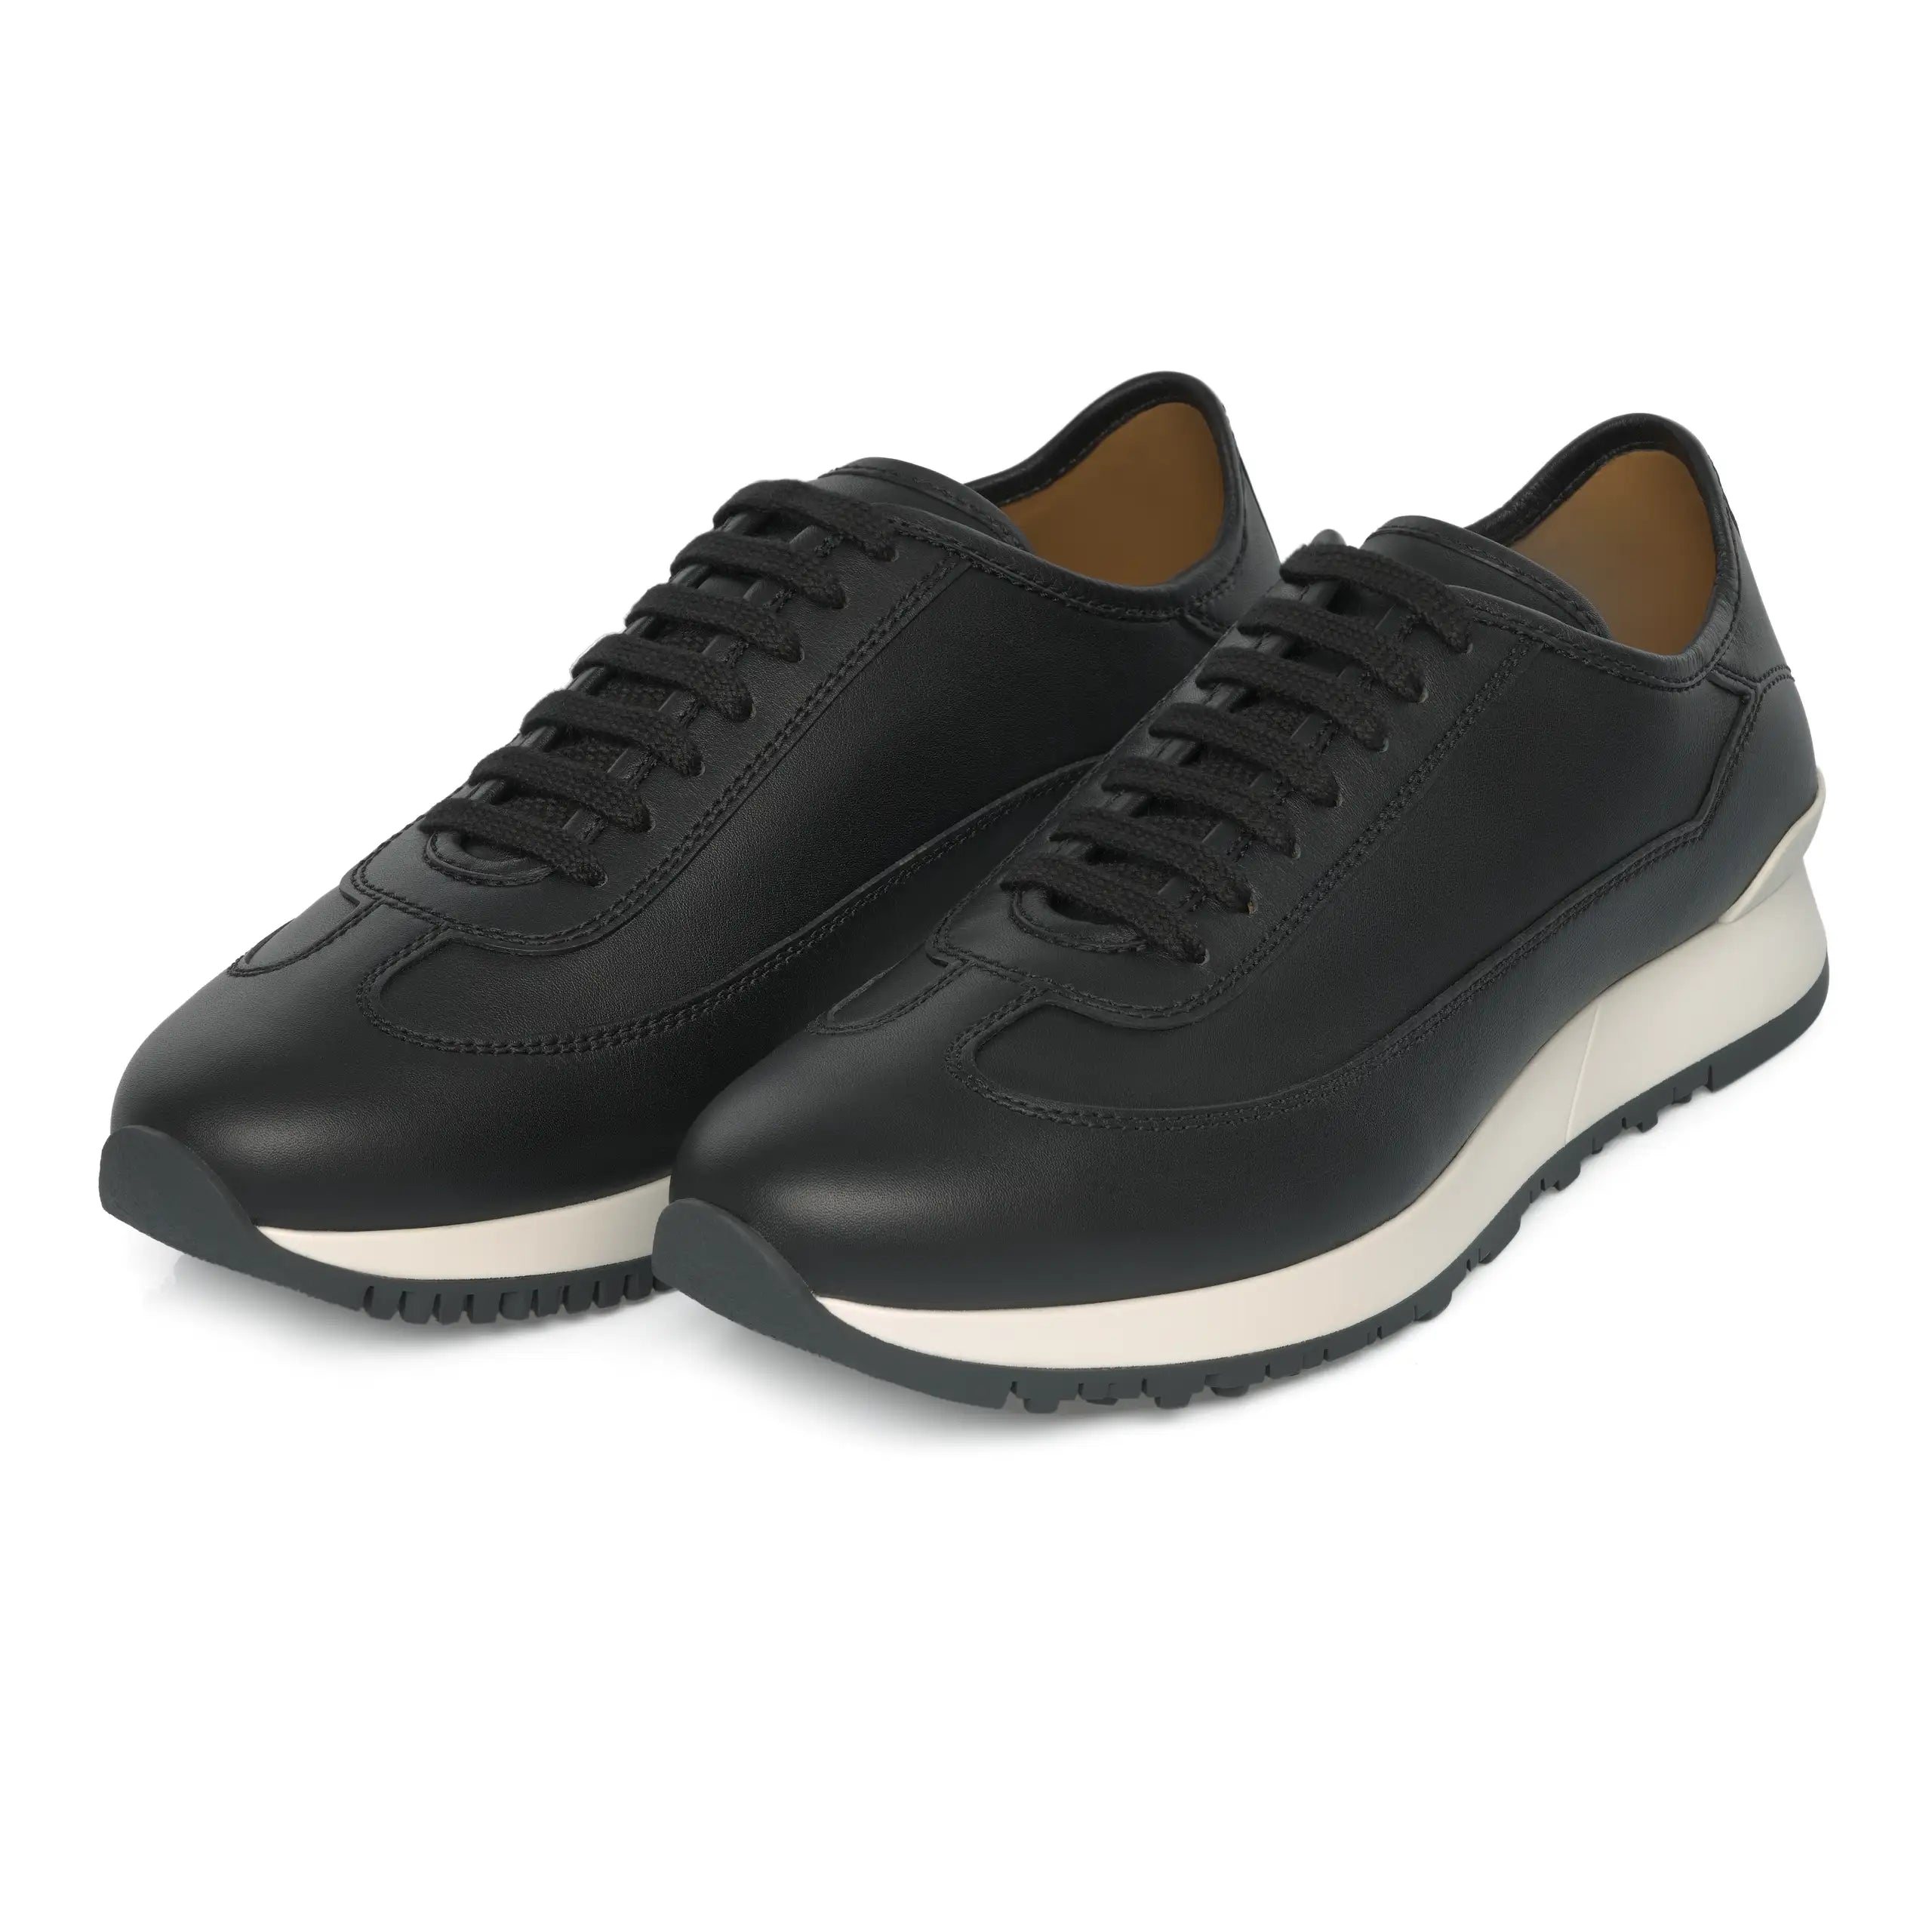 "Foundry II" Calf Leather Sneakers in Black